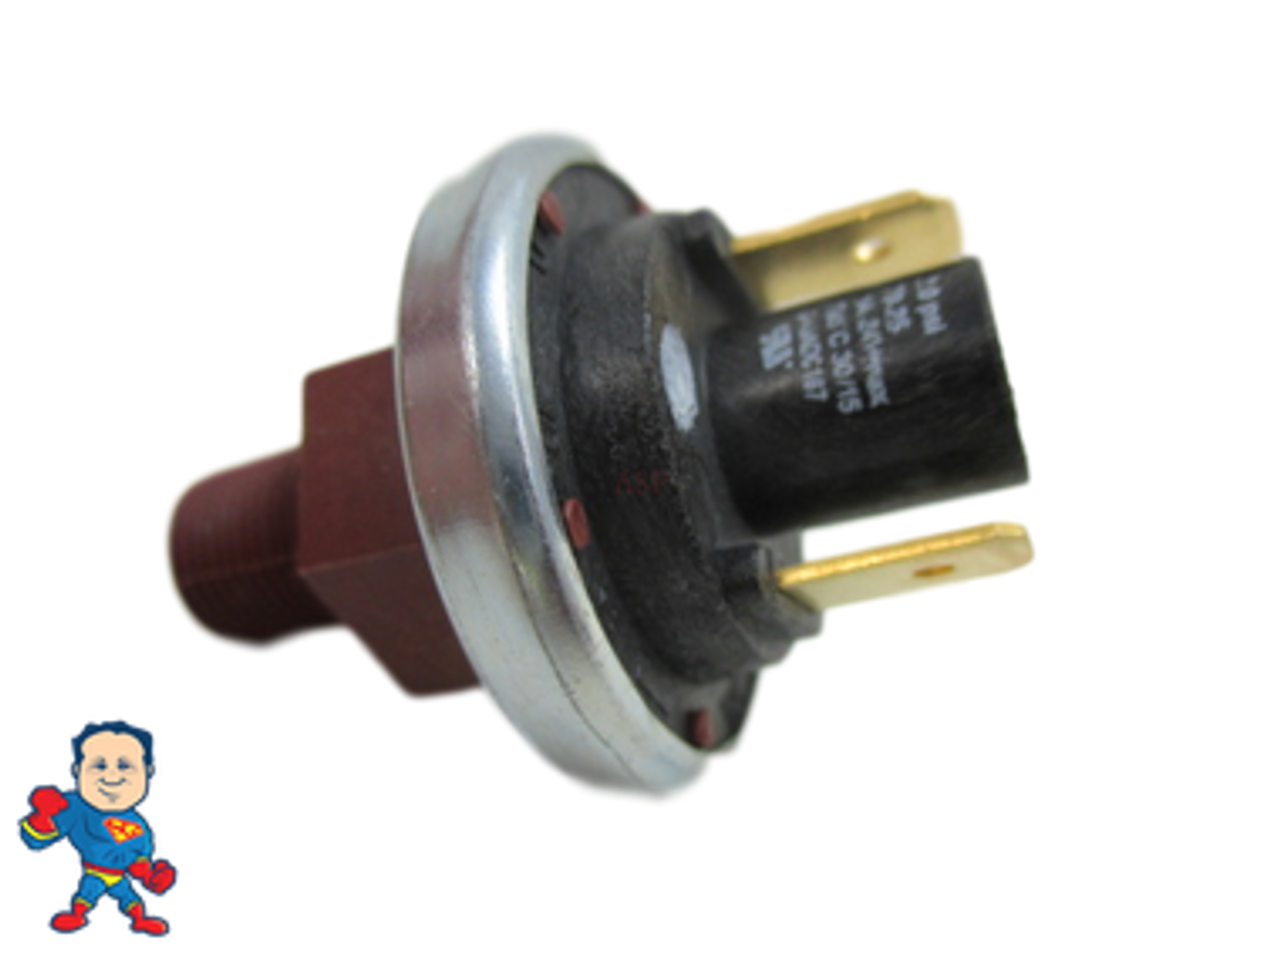 Pressure Switch D-Tec 1/8" mpt 1 Amp Hot Tub Spa Part Universal How To Video